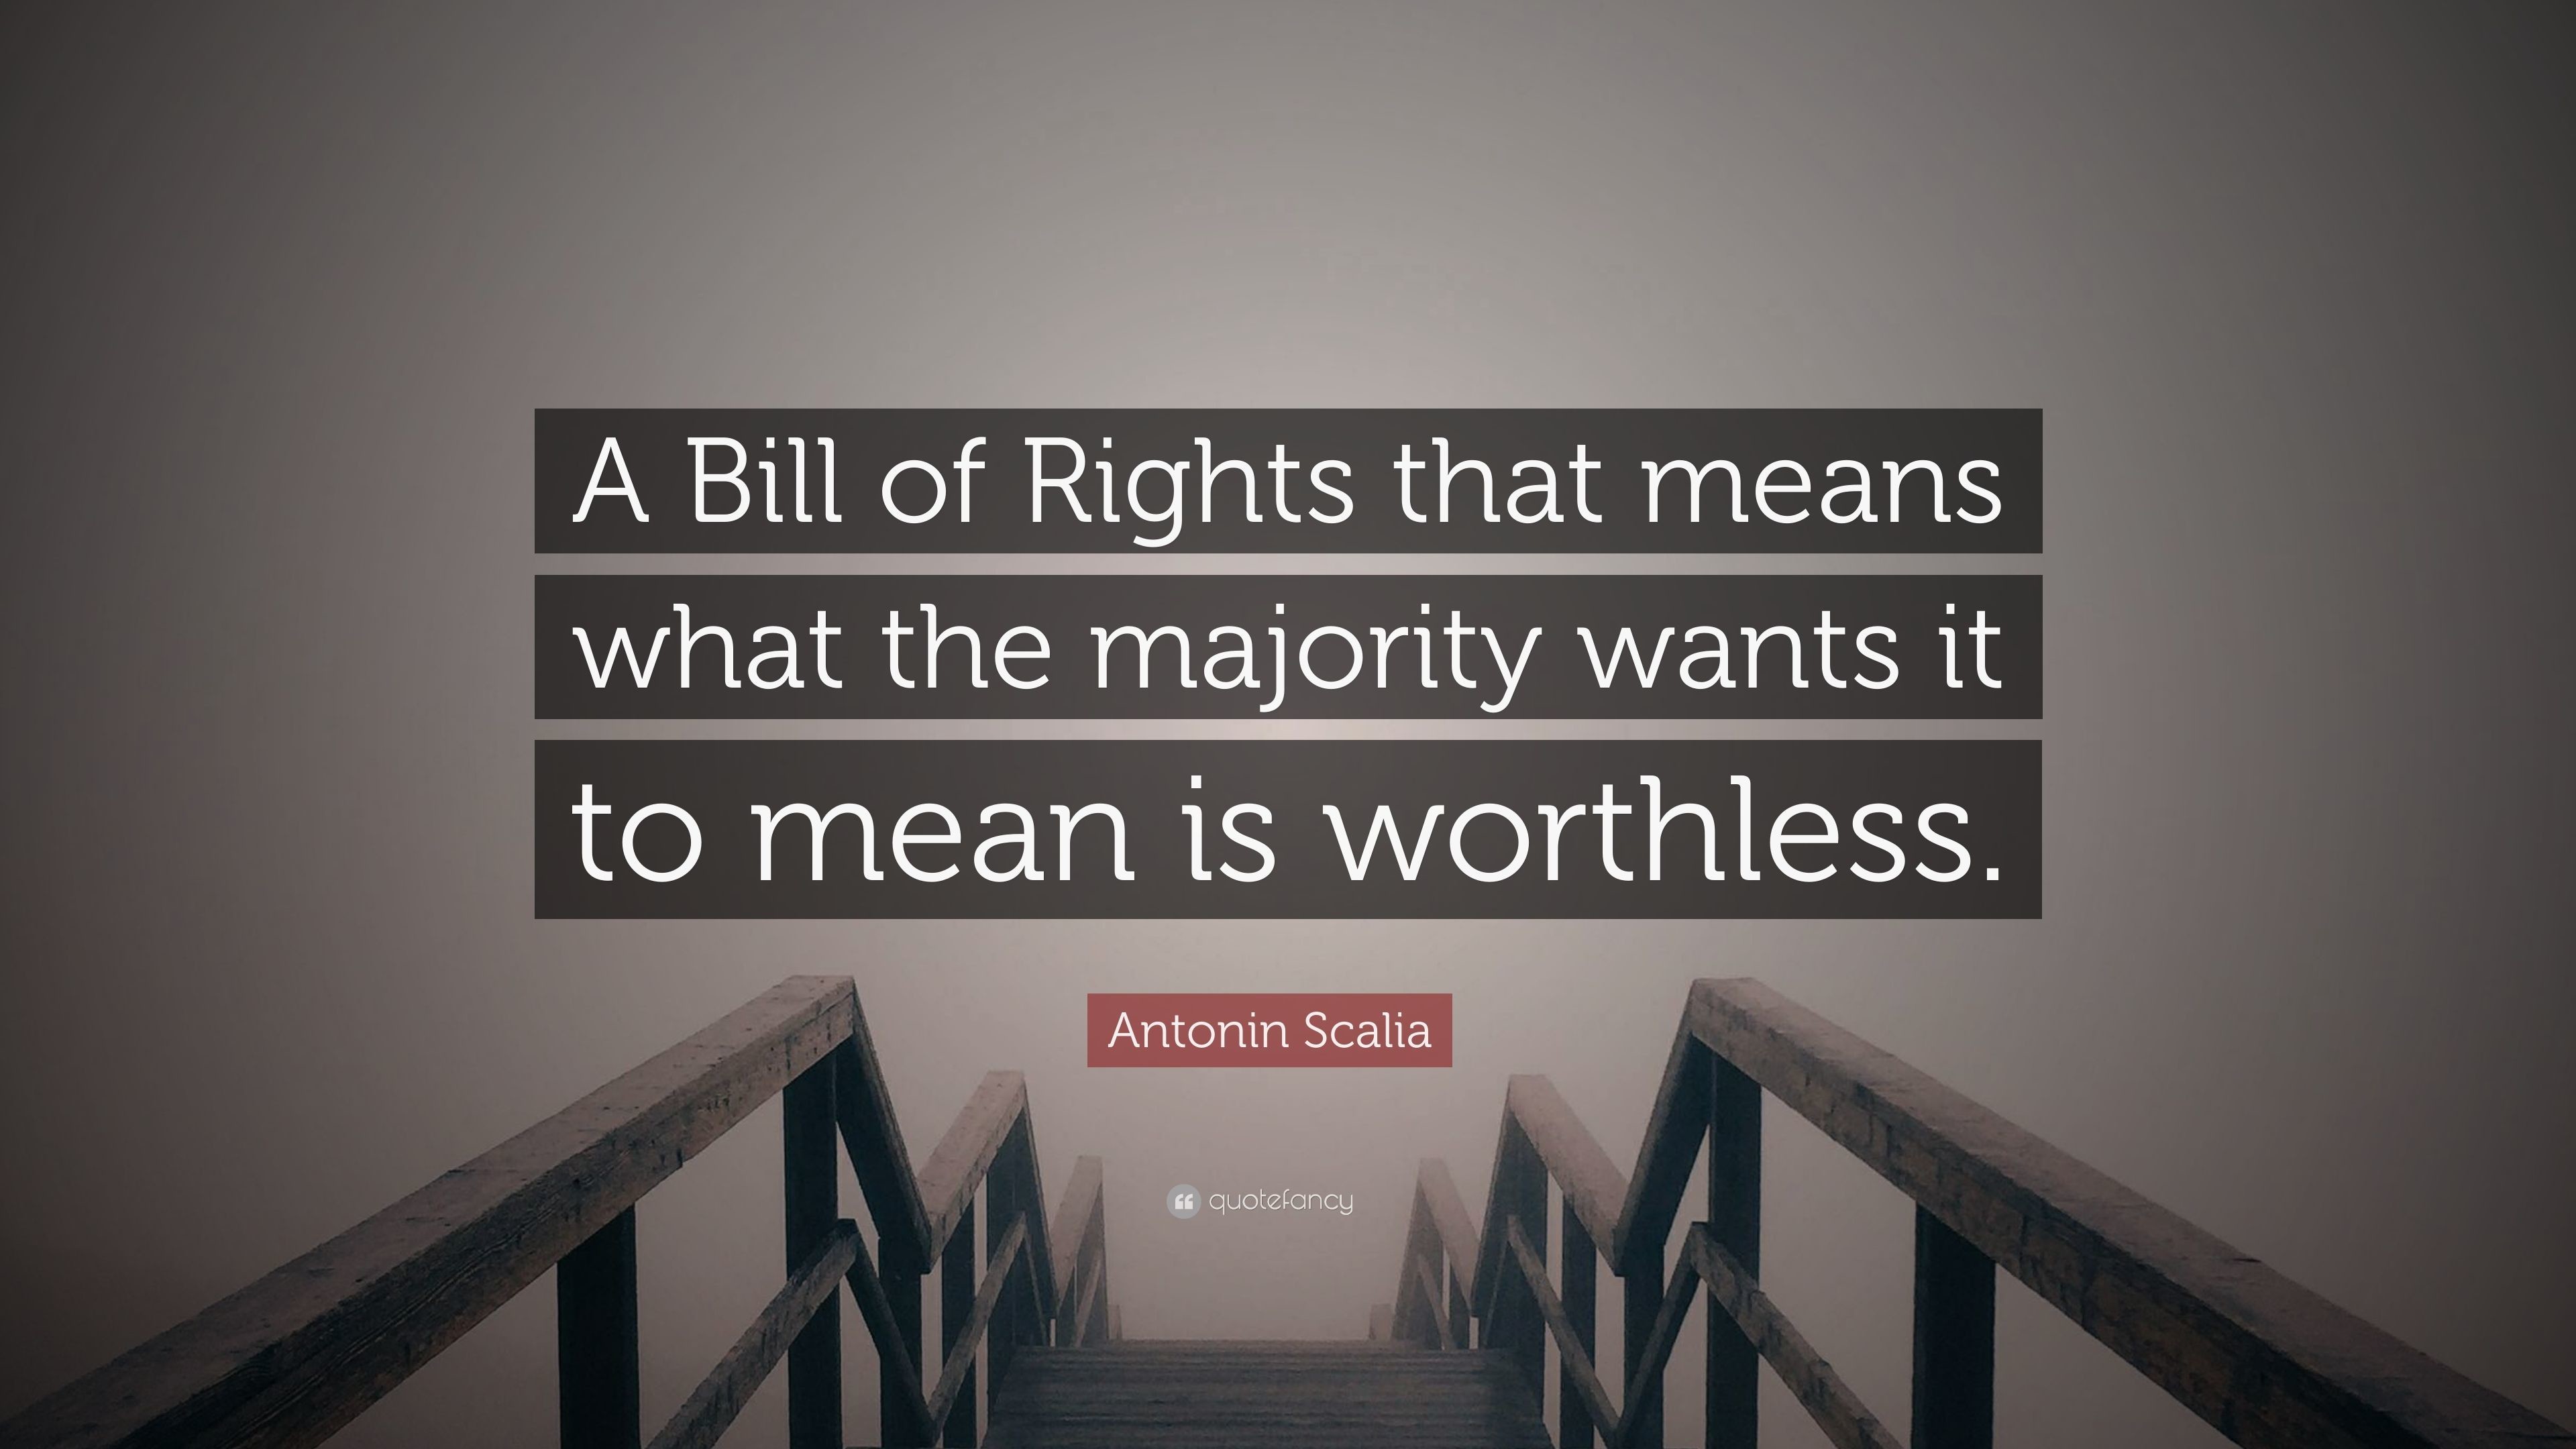 3840x2160 Antonin Scalia Quote: “A Bill of Rights that means what the majority wants  it